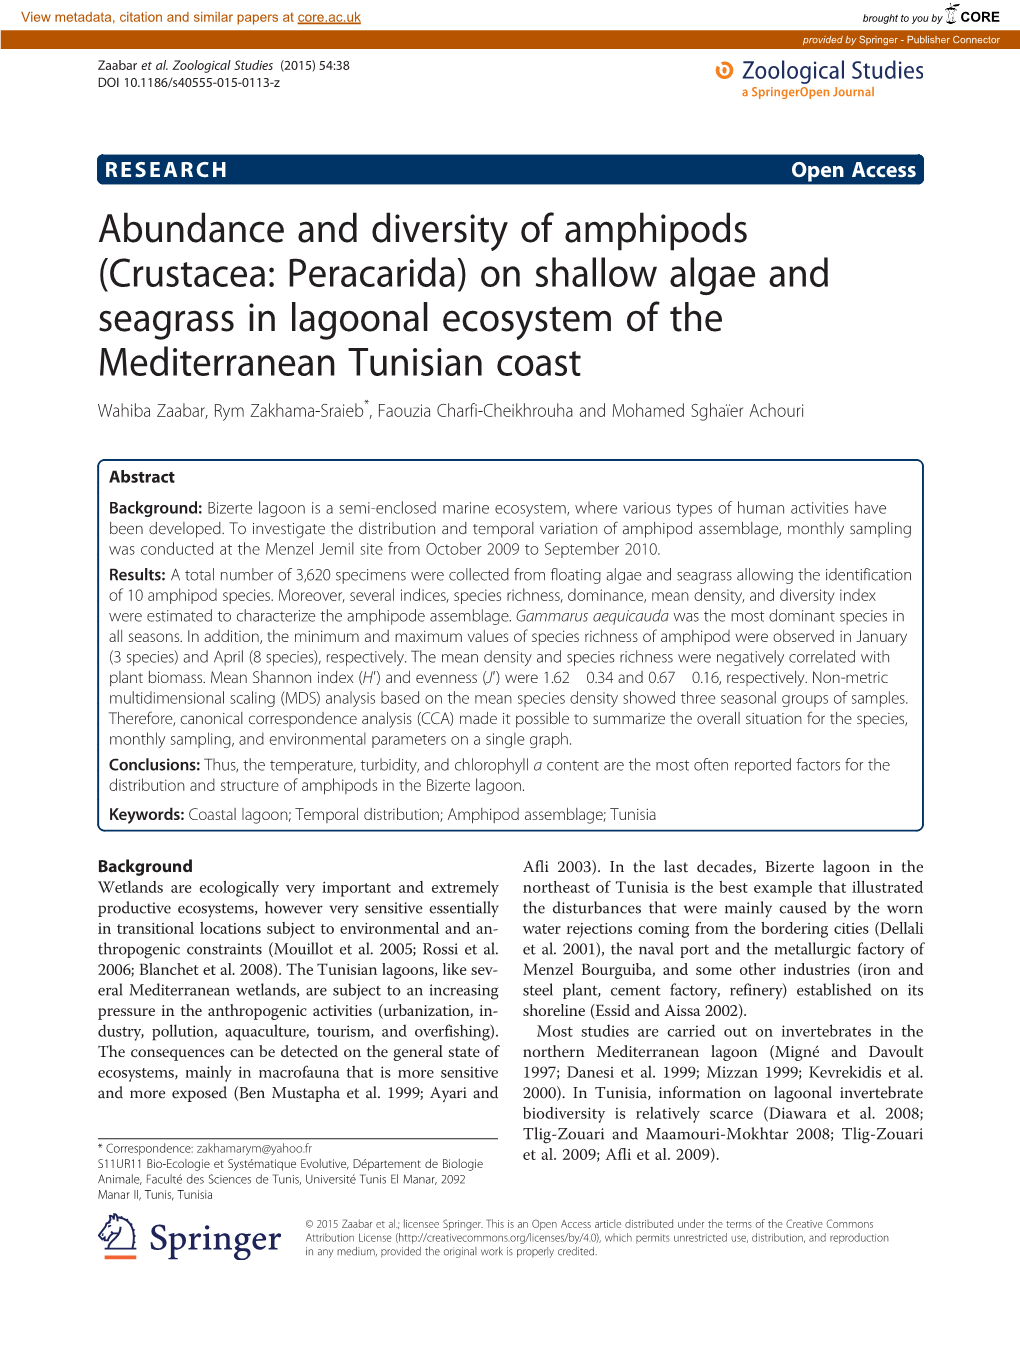 Abundance and Diversity of Amphipods (Crustacea: Peracarida) on Shallow Algae and Seagrass in Lagoonal Ecosystem of the Mediterr